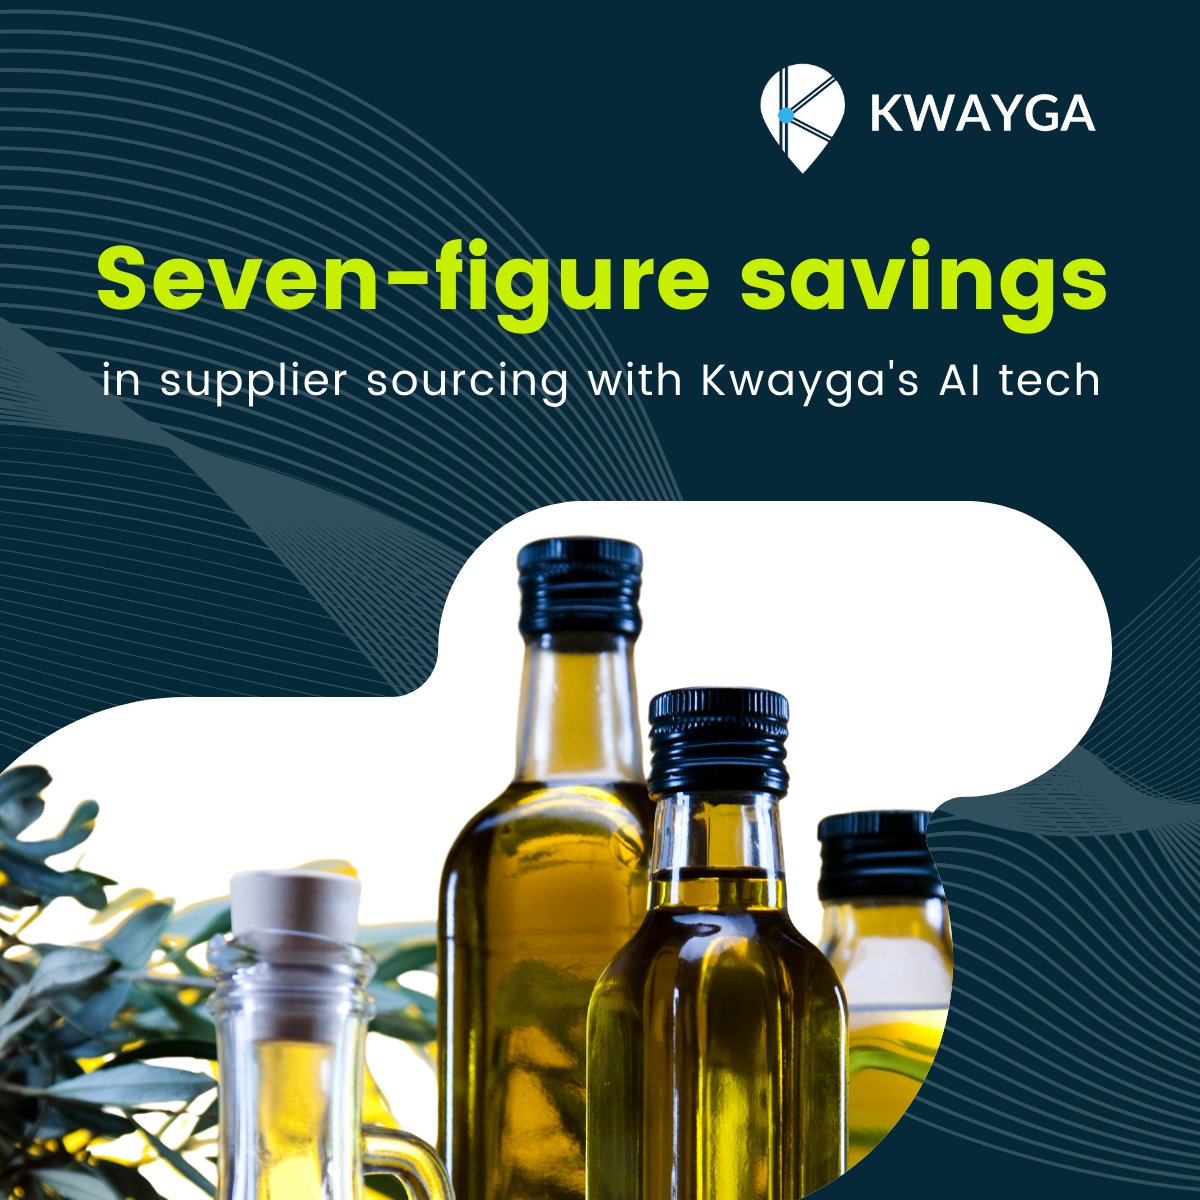 More than €1ml per annum cost savings on oils achieved by a supermarket buyer using Kwayga. Deal agreed in less than 3 weeks. Want to learn how they could do this? Book a demo of Kwayga today! 🚀 #sourcing #oliveoil #supplychain